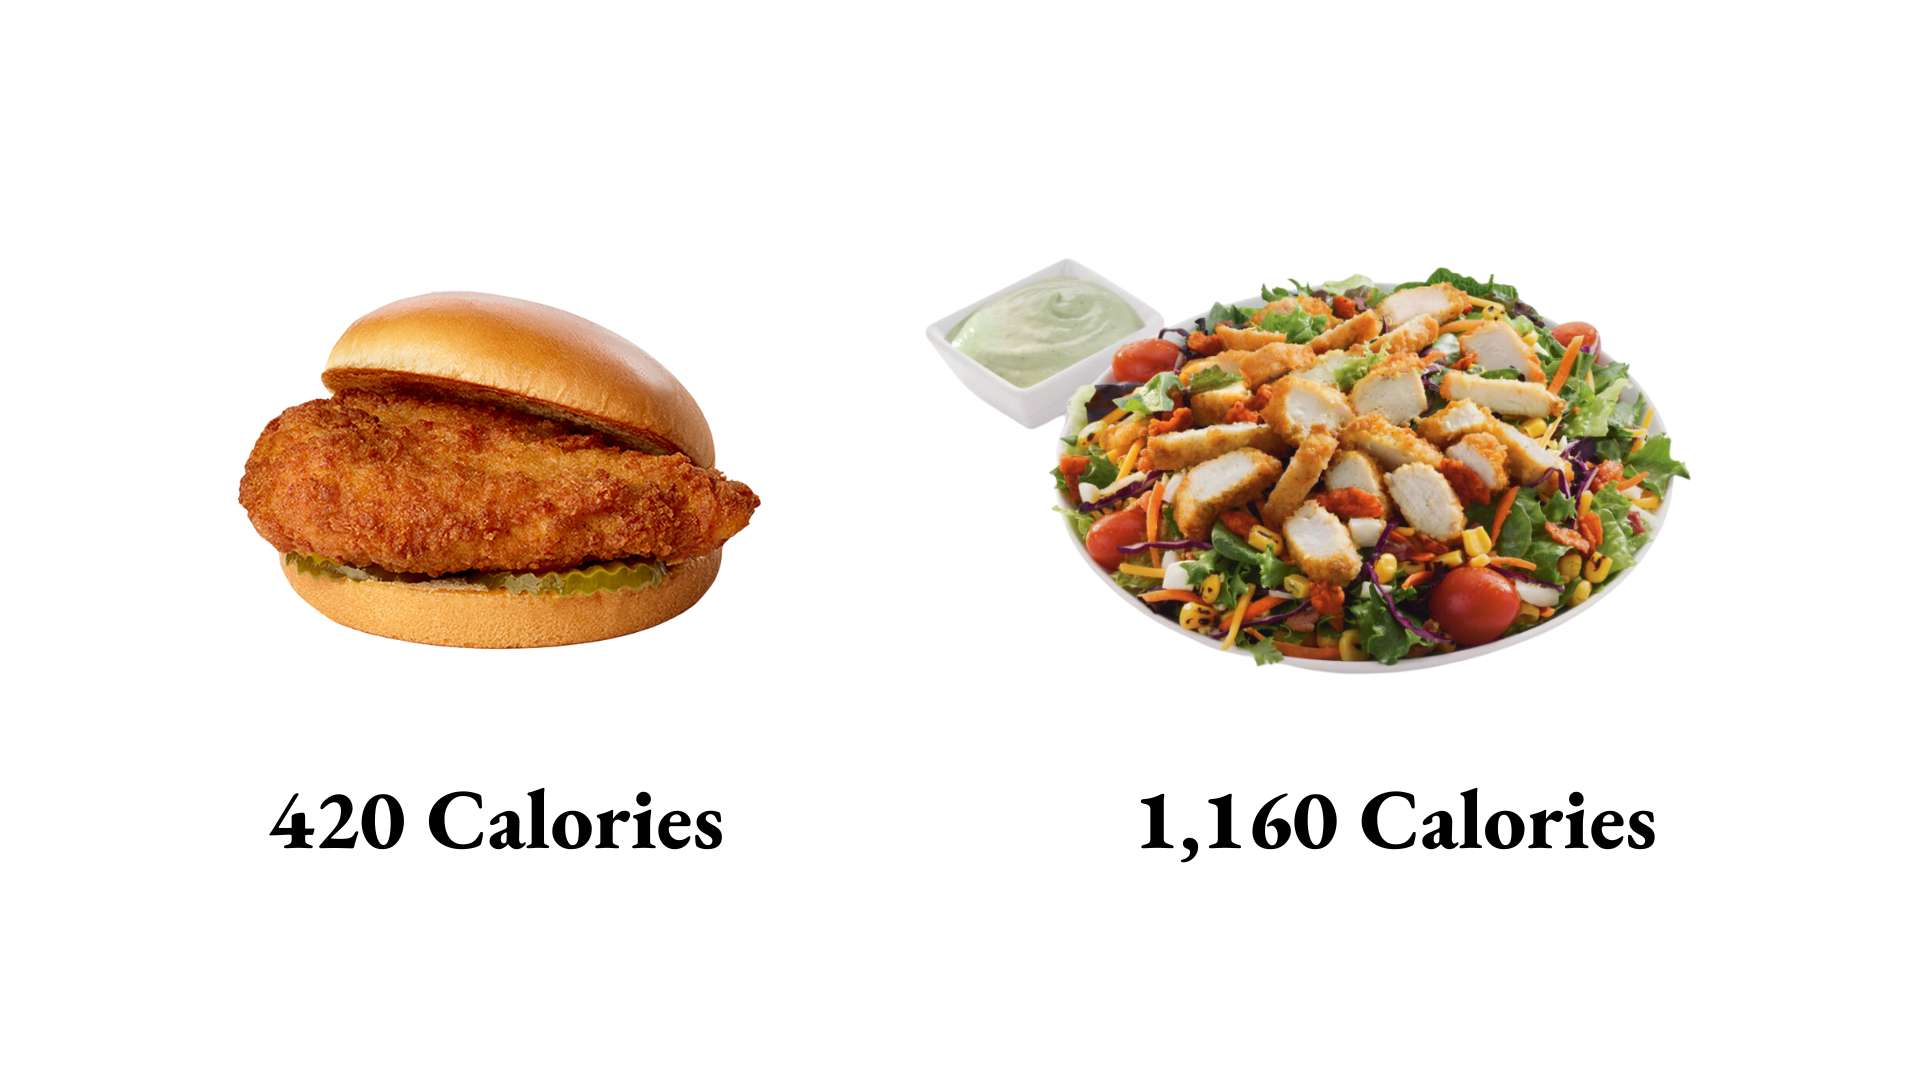 Calorie amounts for Chick-fil-a food